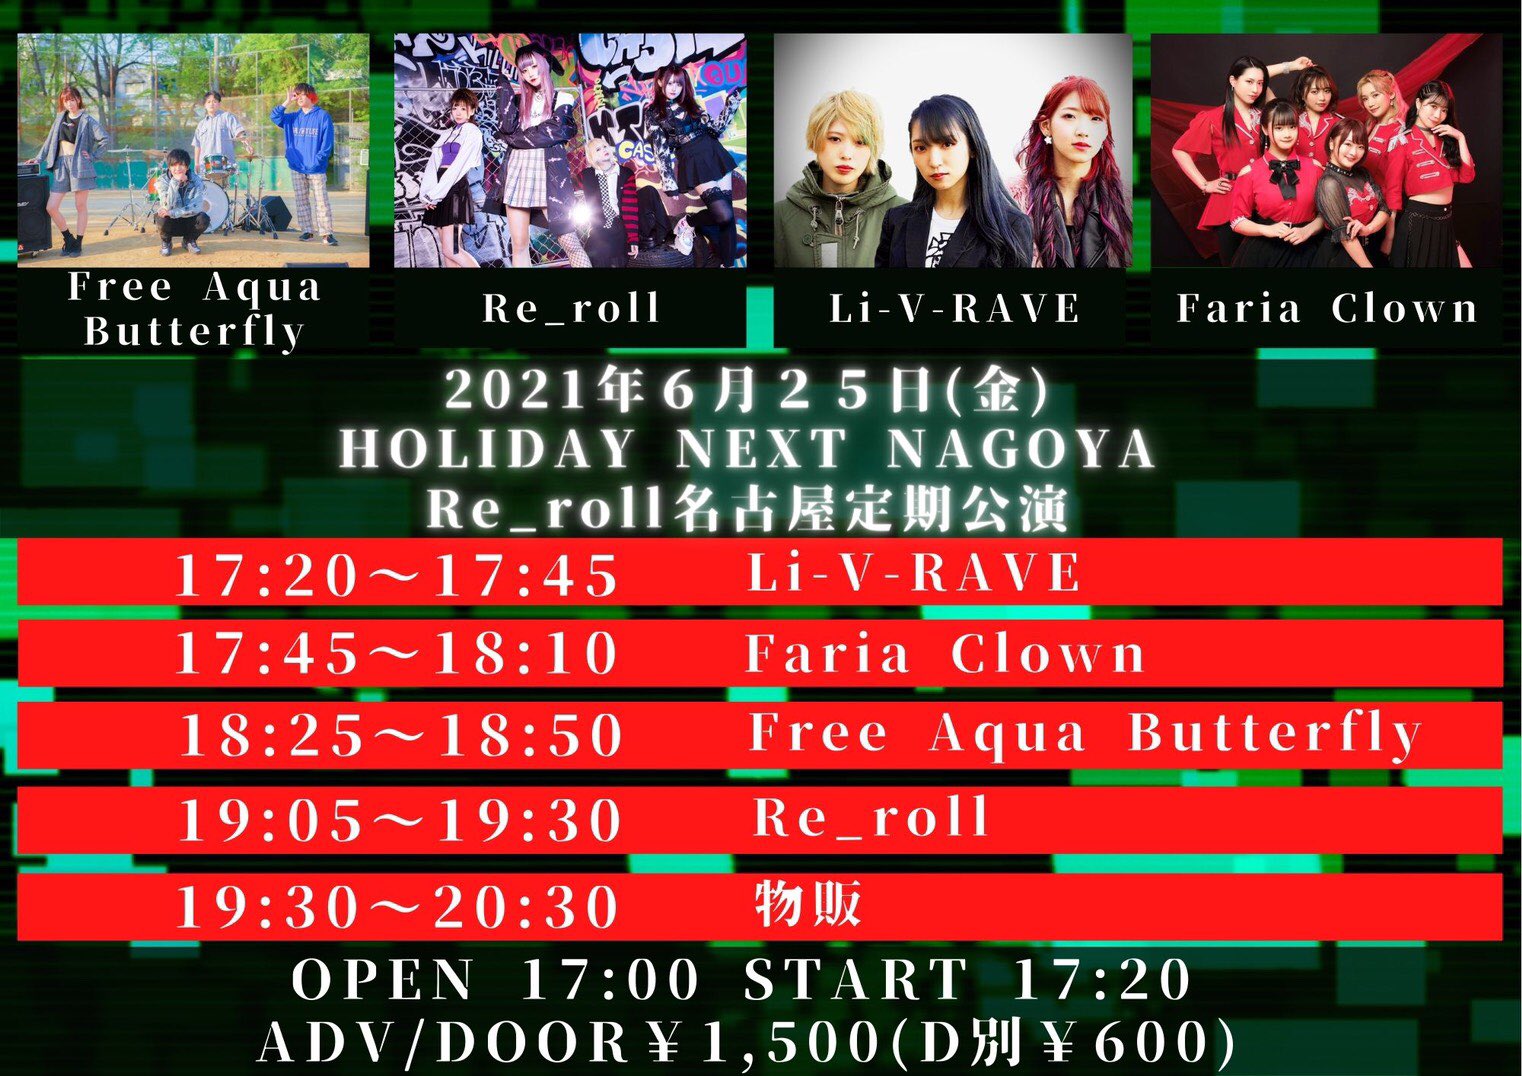 Re_roll 名古屋定期公演